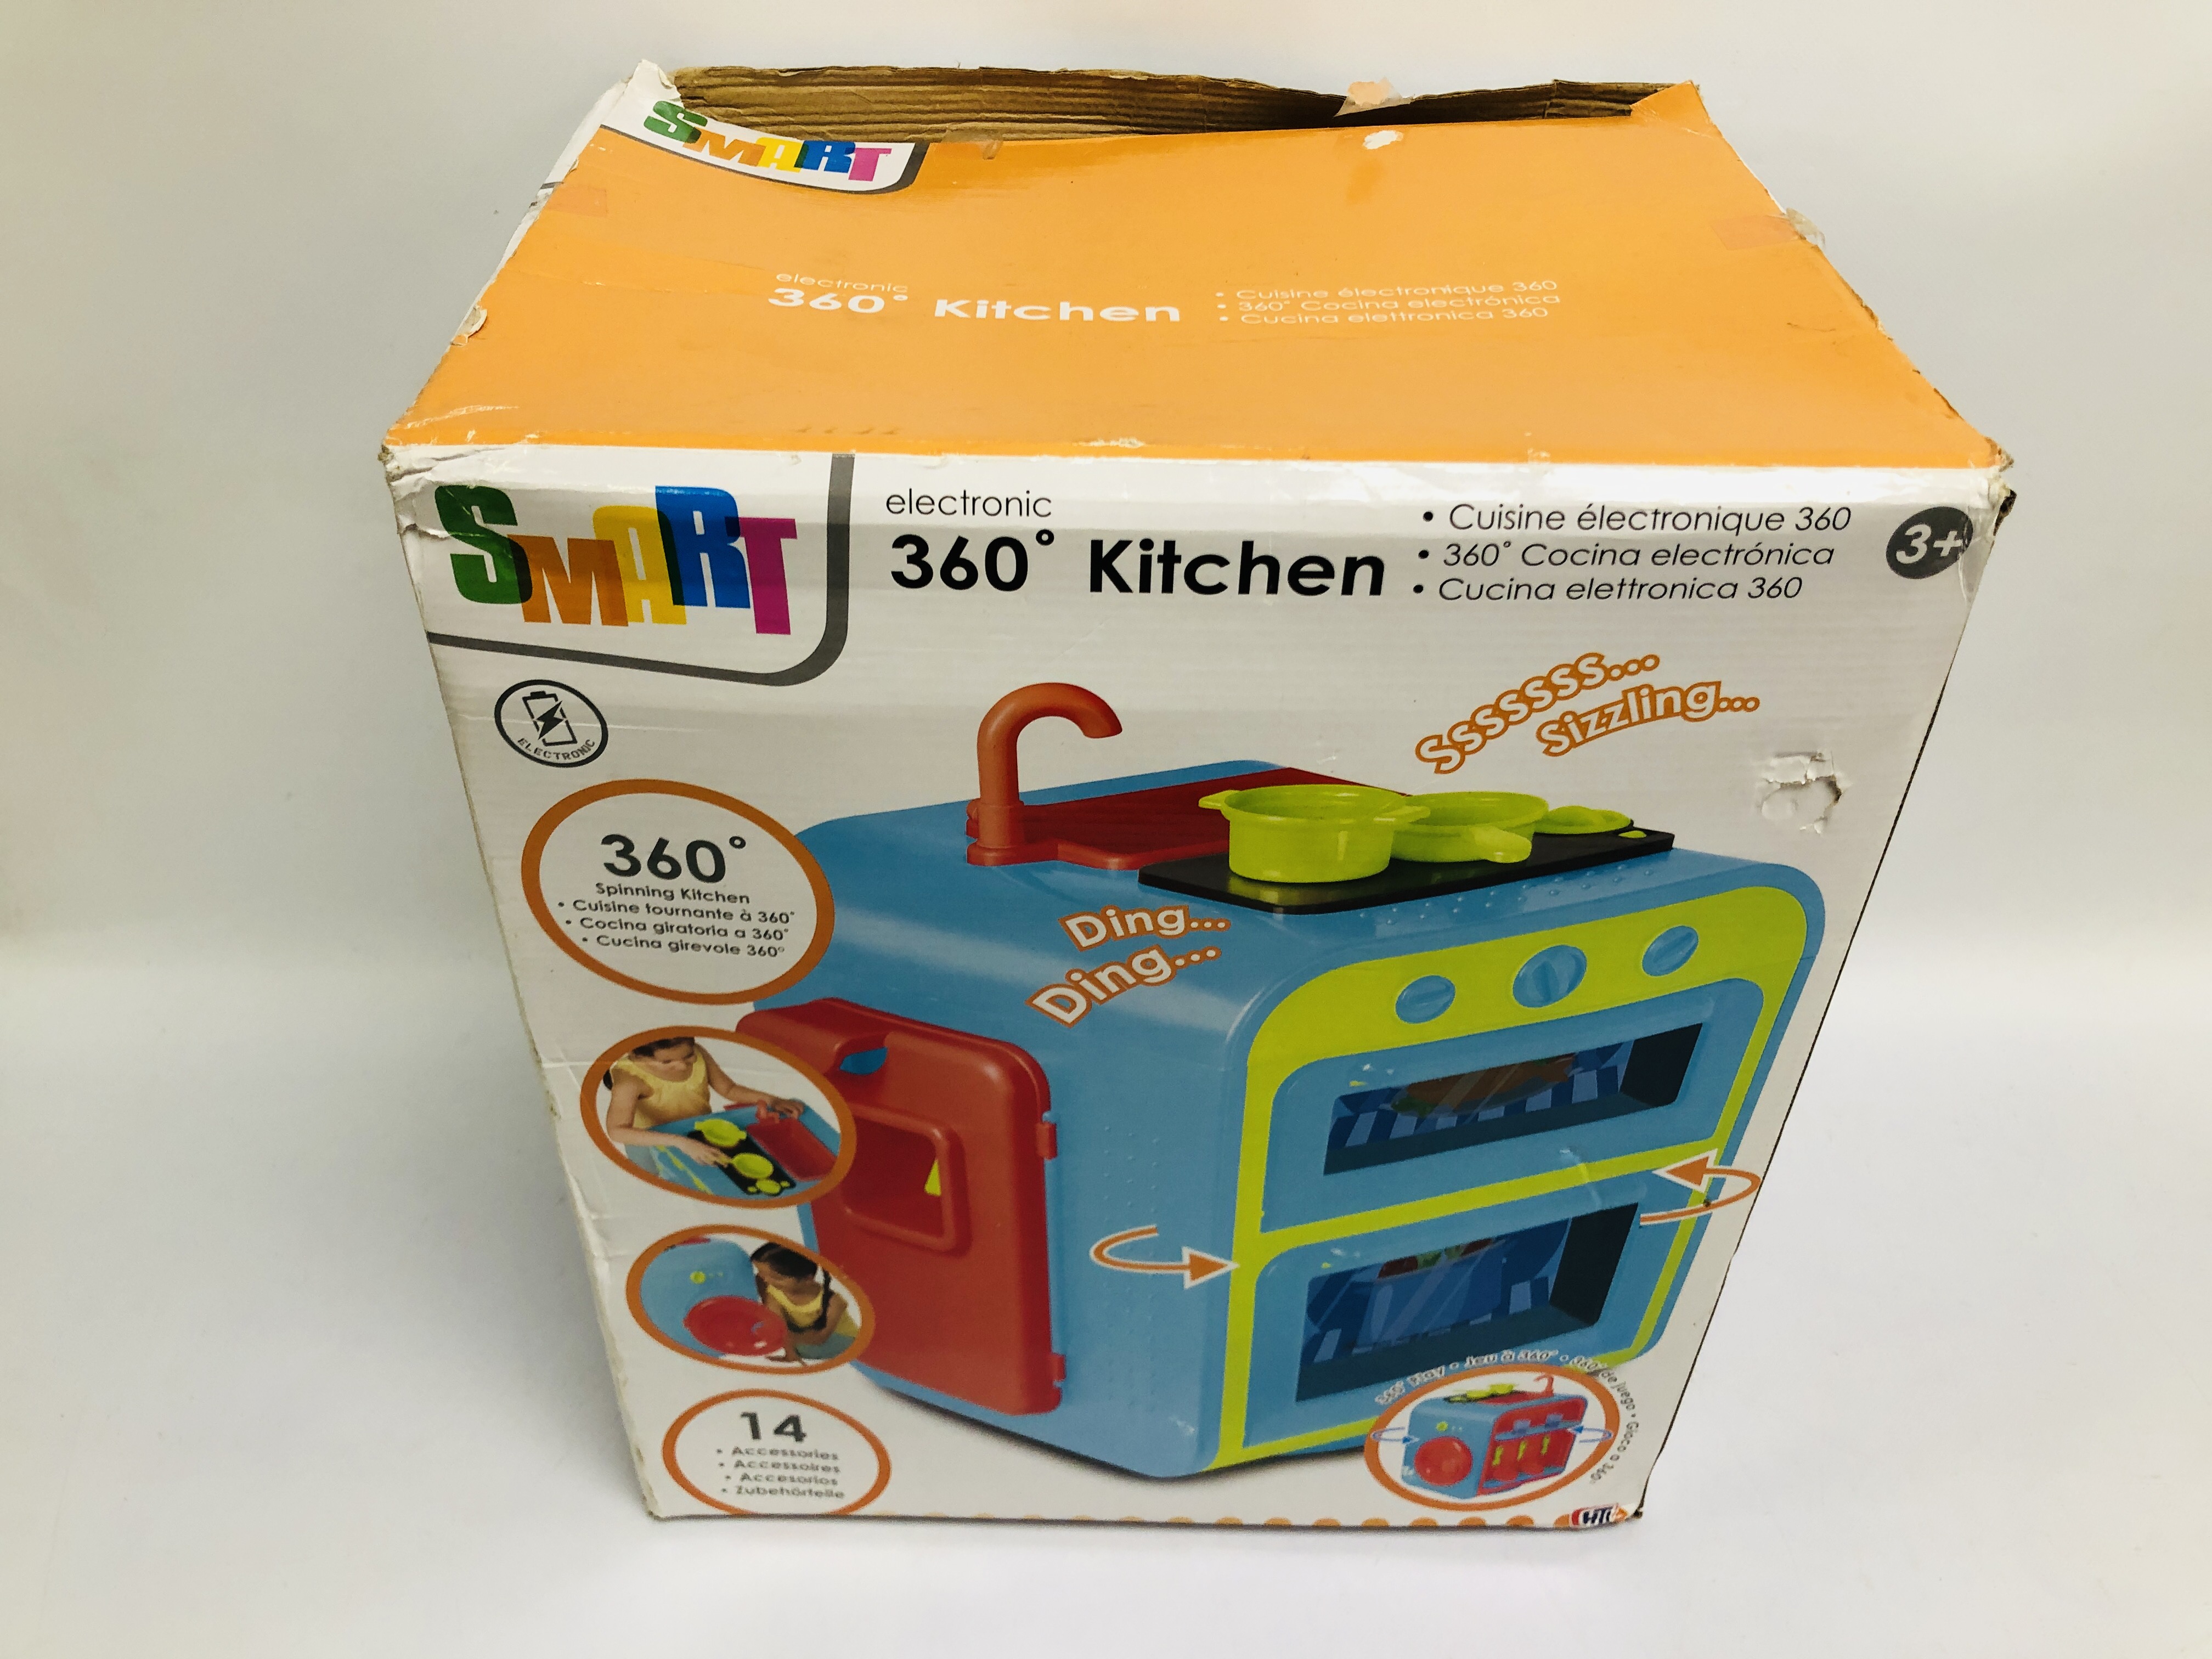 BOXED AS NEW SMART ELECTRONIC 360° KITCHEN BY HTI - SOLD AS SEEN - Image 4 of 4